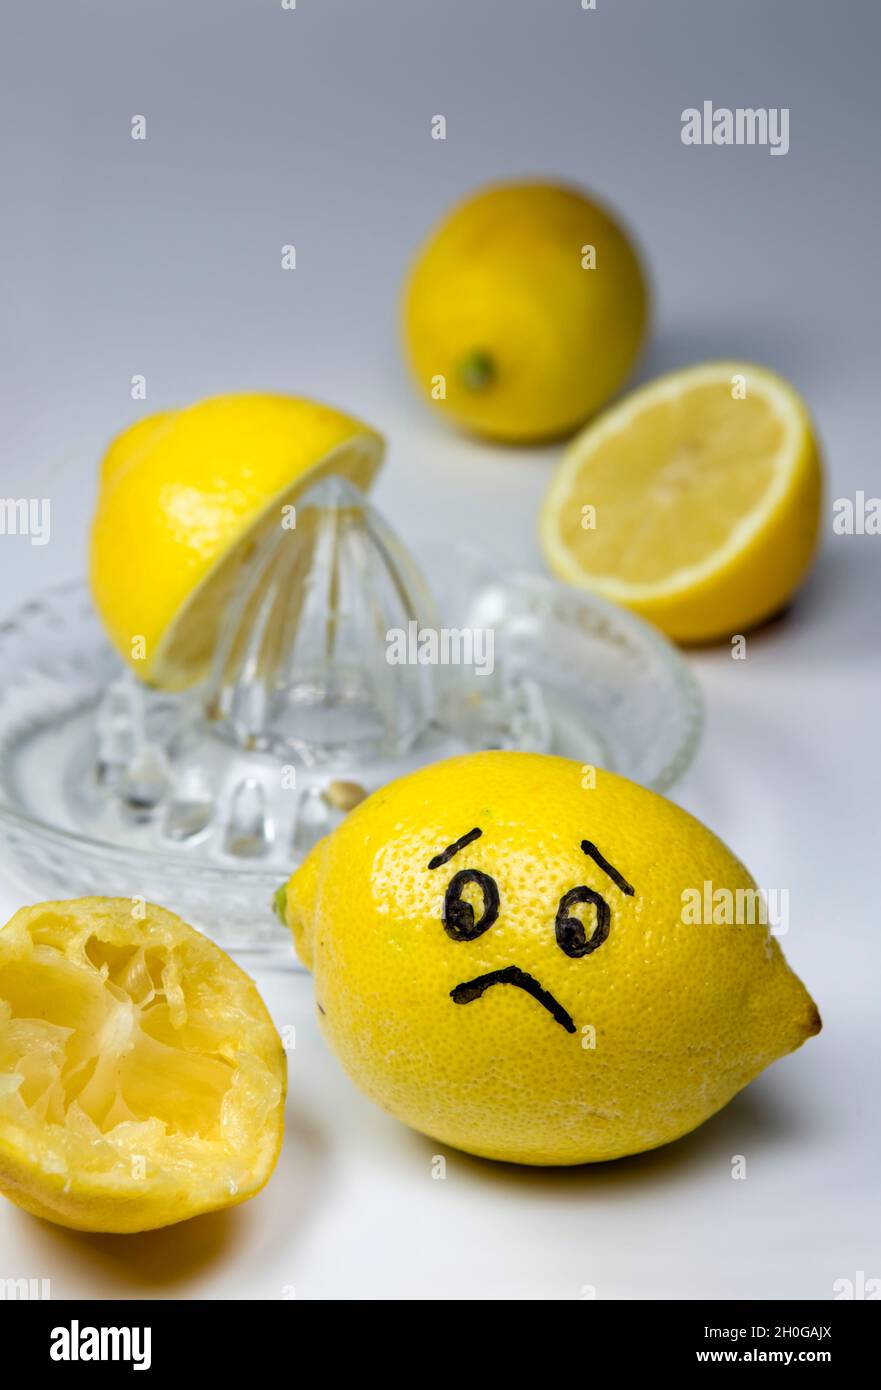 Unhappy Lemon watching other lemons being cut up and squeezed Stock Photo